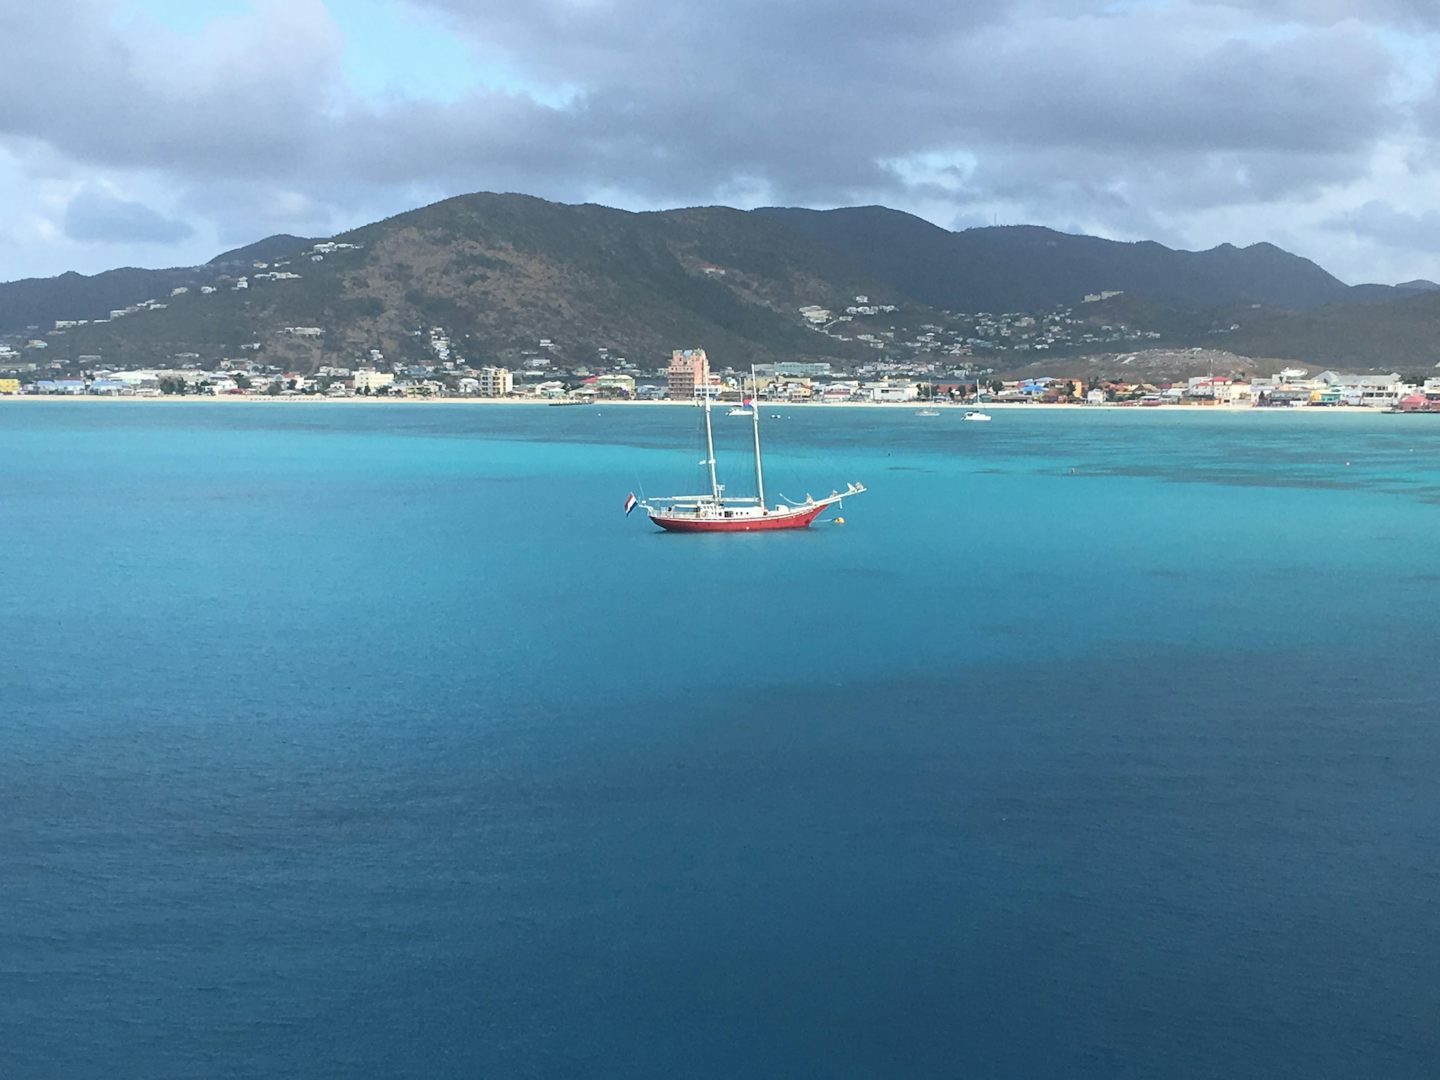 St Maarten from our room on the ship